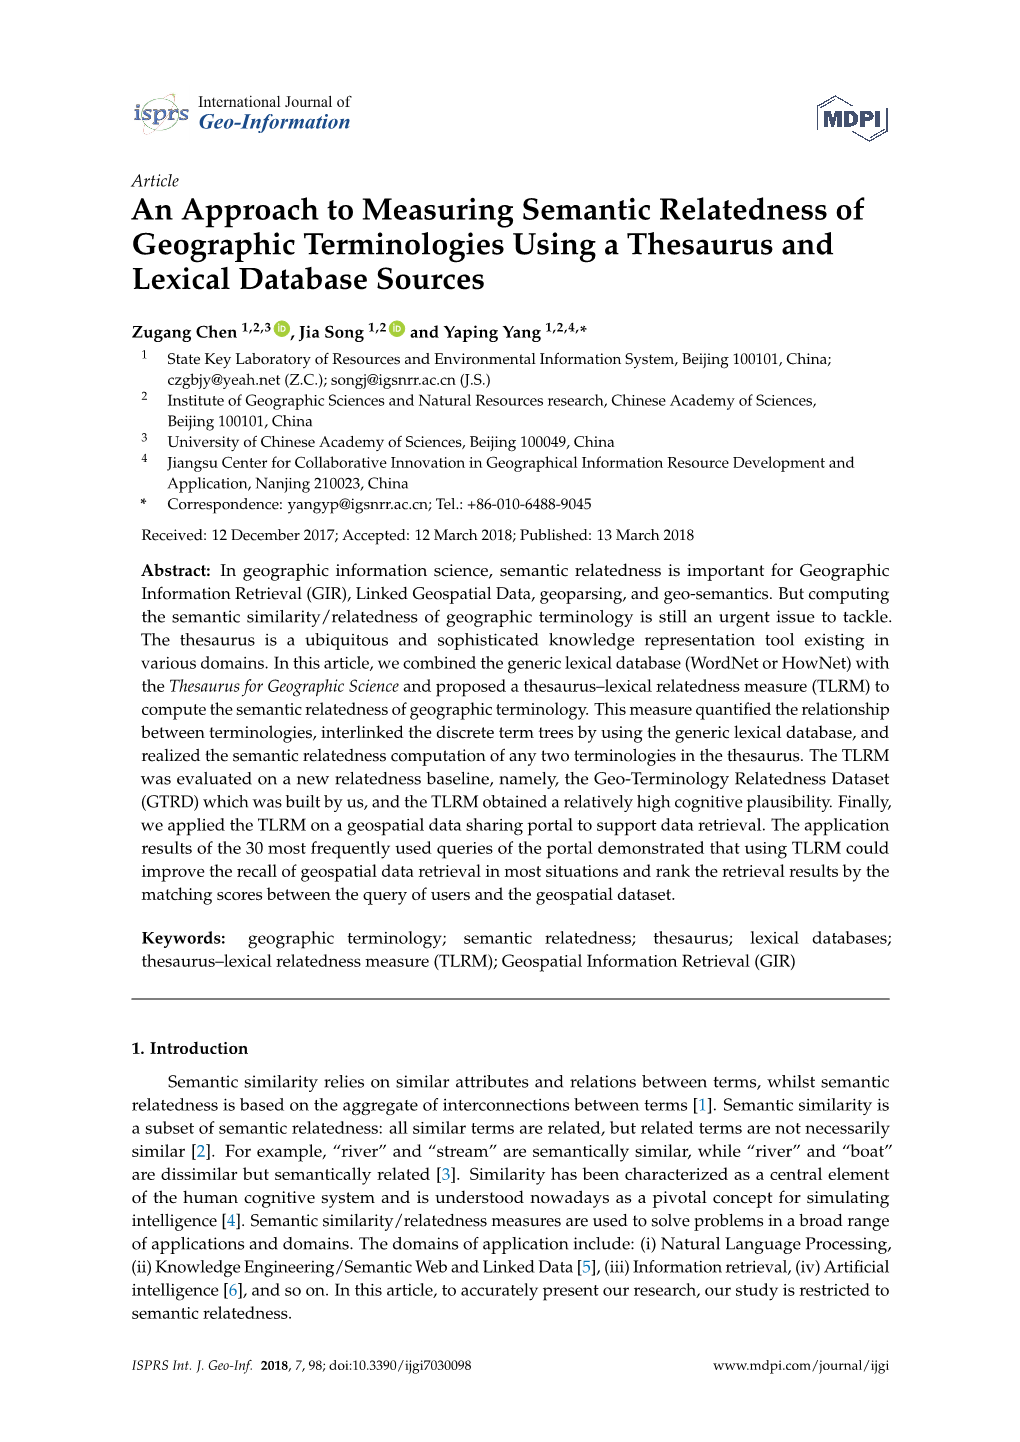 An Approach to Measuring Semantic Relatedness of Geographic Terminologies Using a Thesaurus and Lexical Database Sources